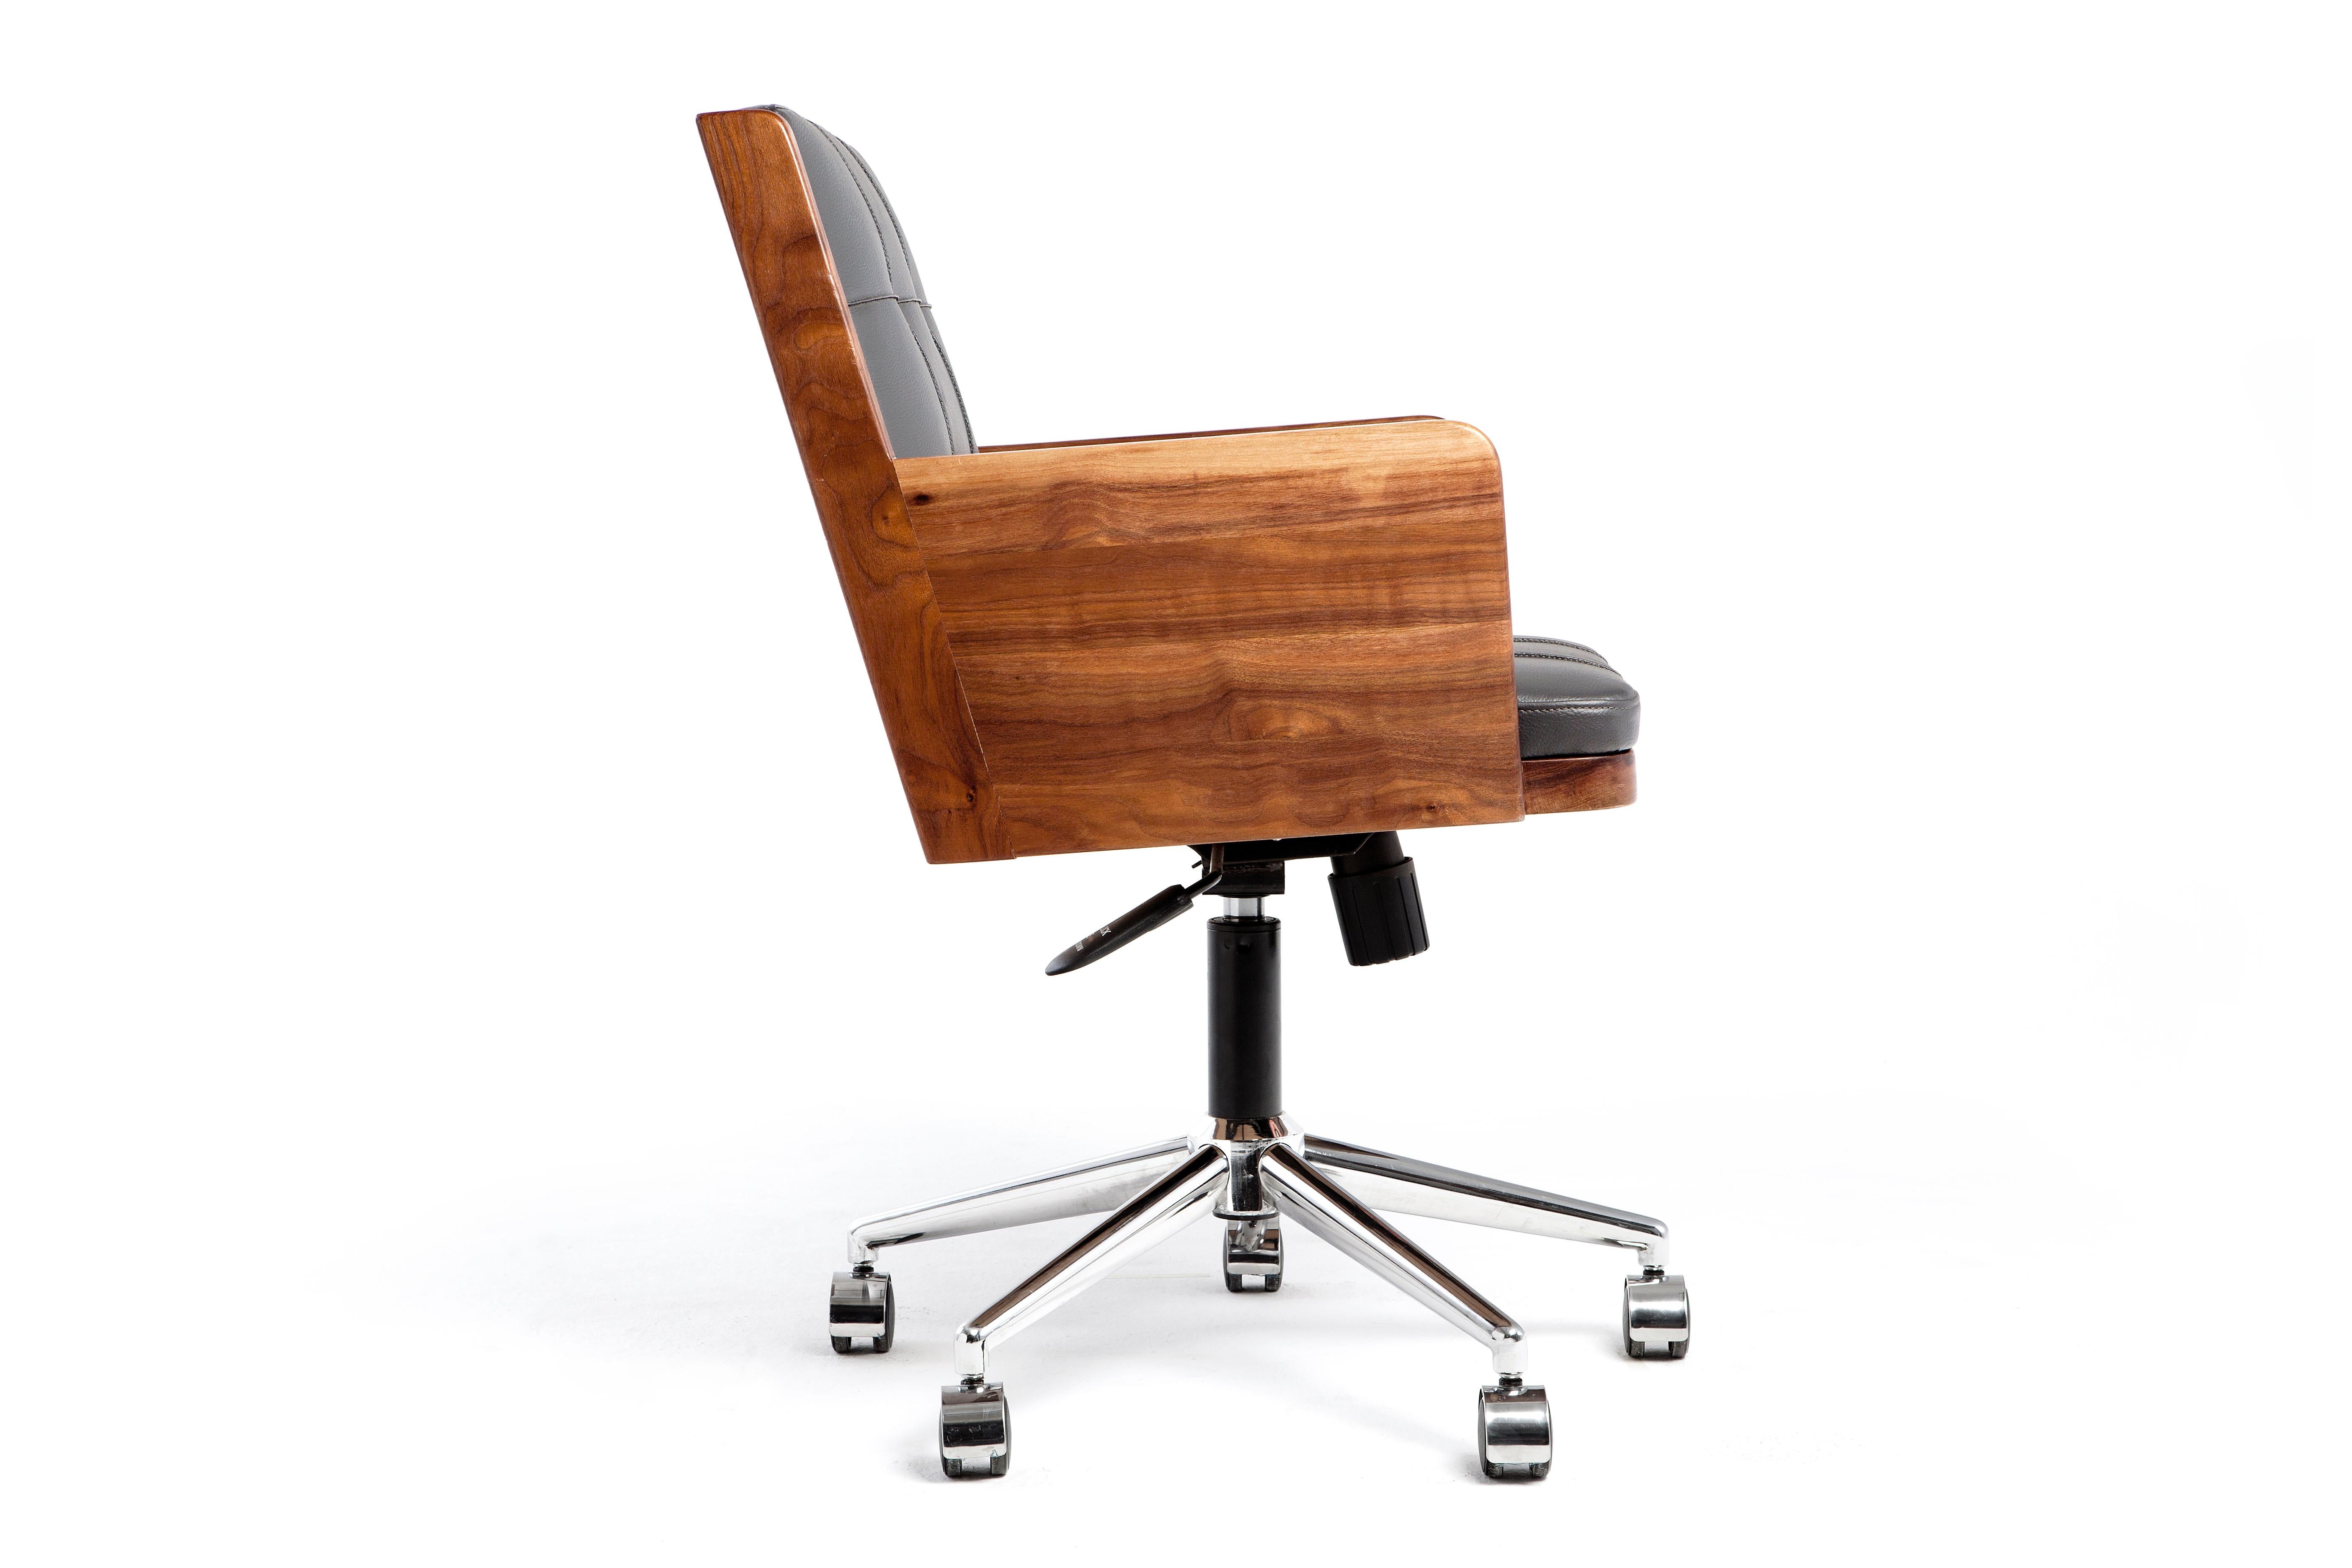 Darwin added wheels to the office chair in 19th century.
In the 1970s ergonomics was added to design criteria.
Today, it is the key element for whom spends long hours in the office.
Office chair consists a solid walnut/oak/plywood body,